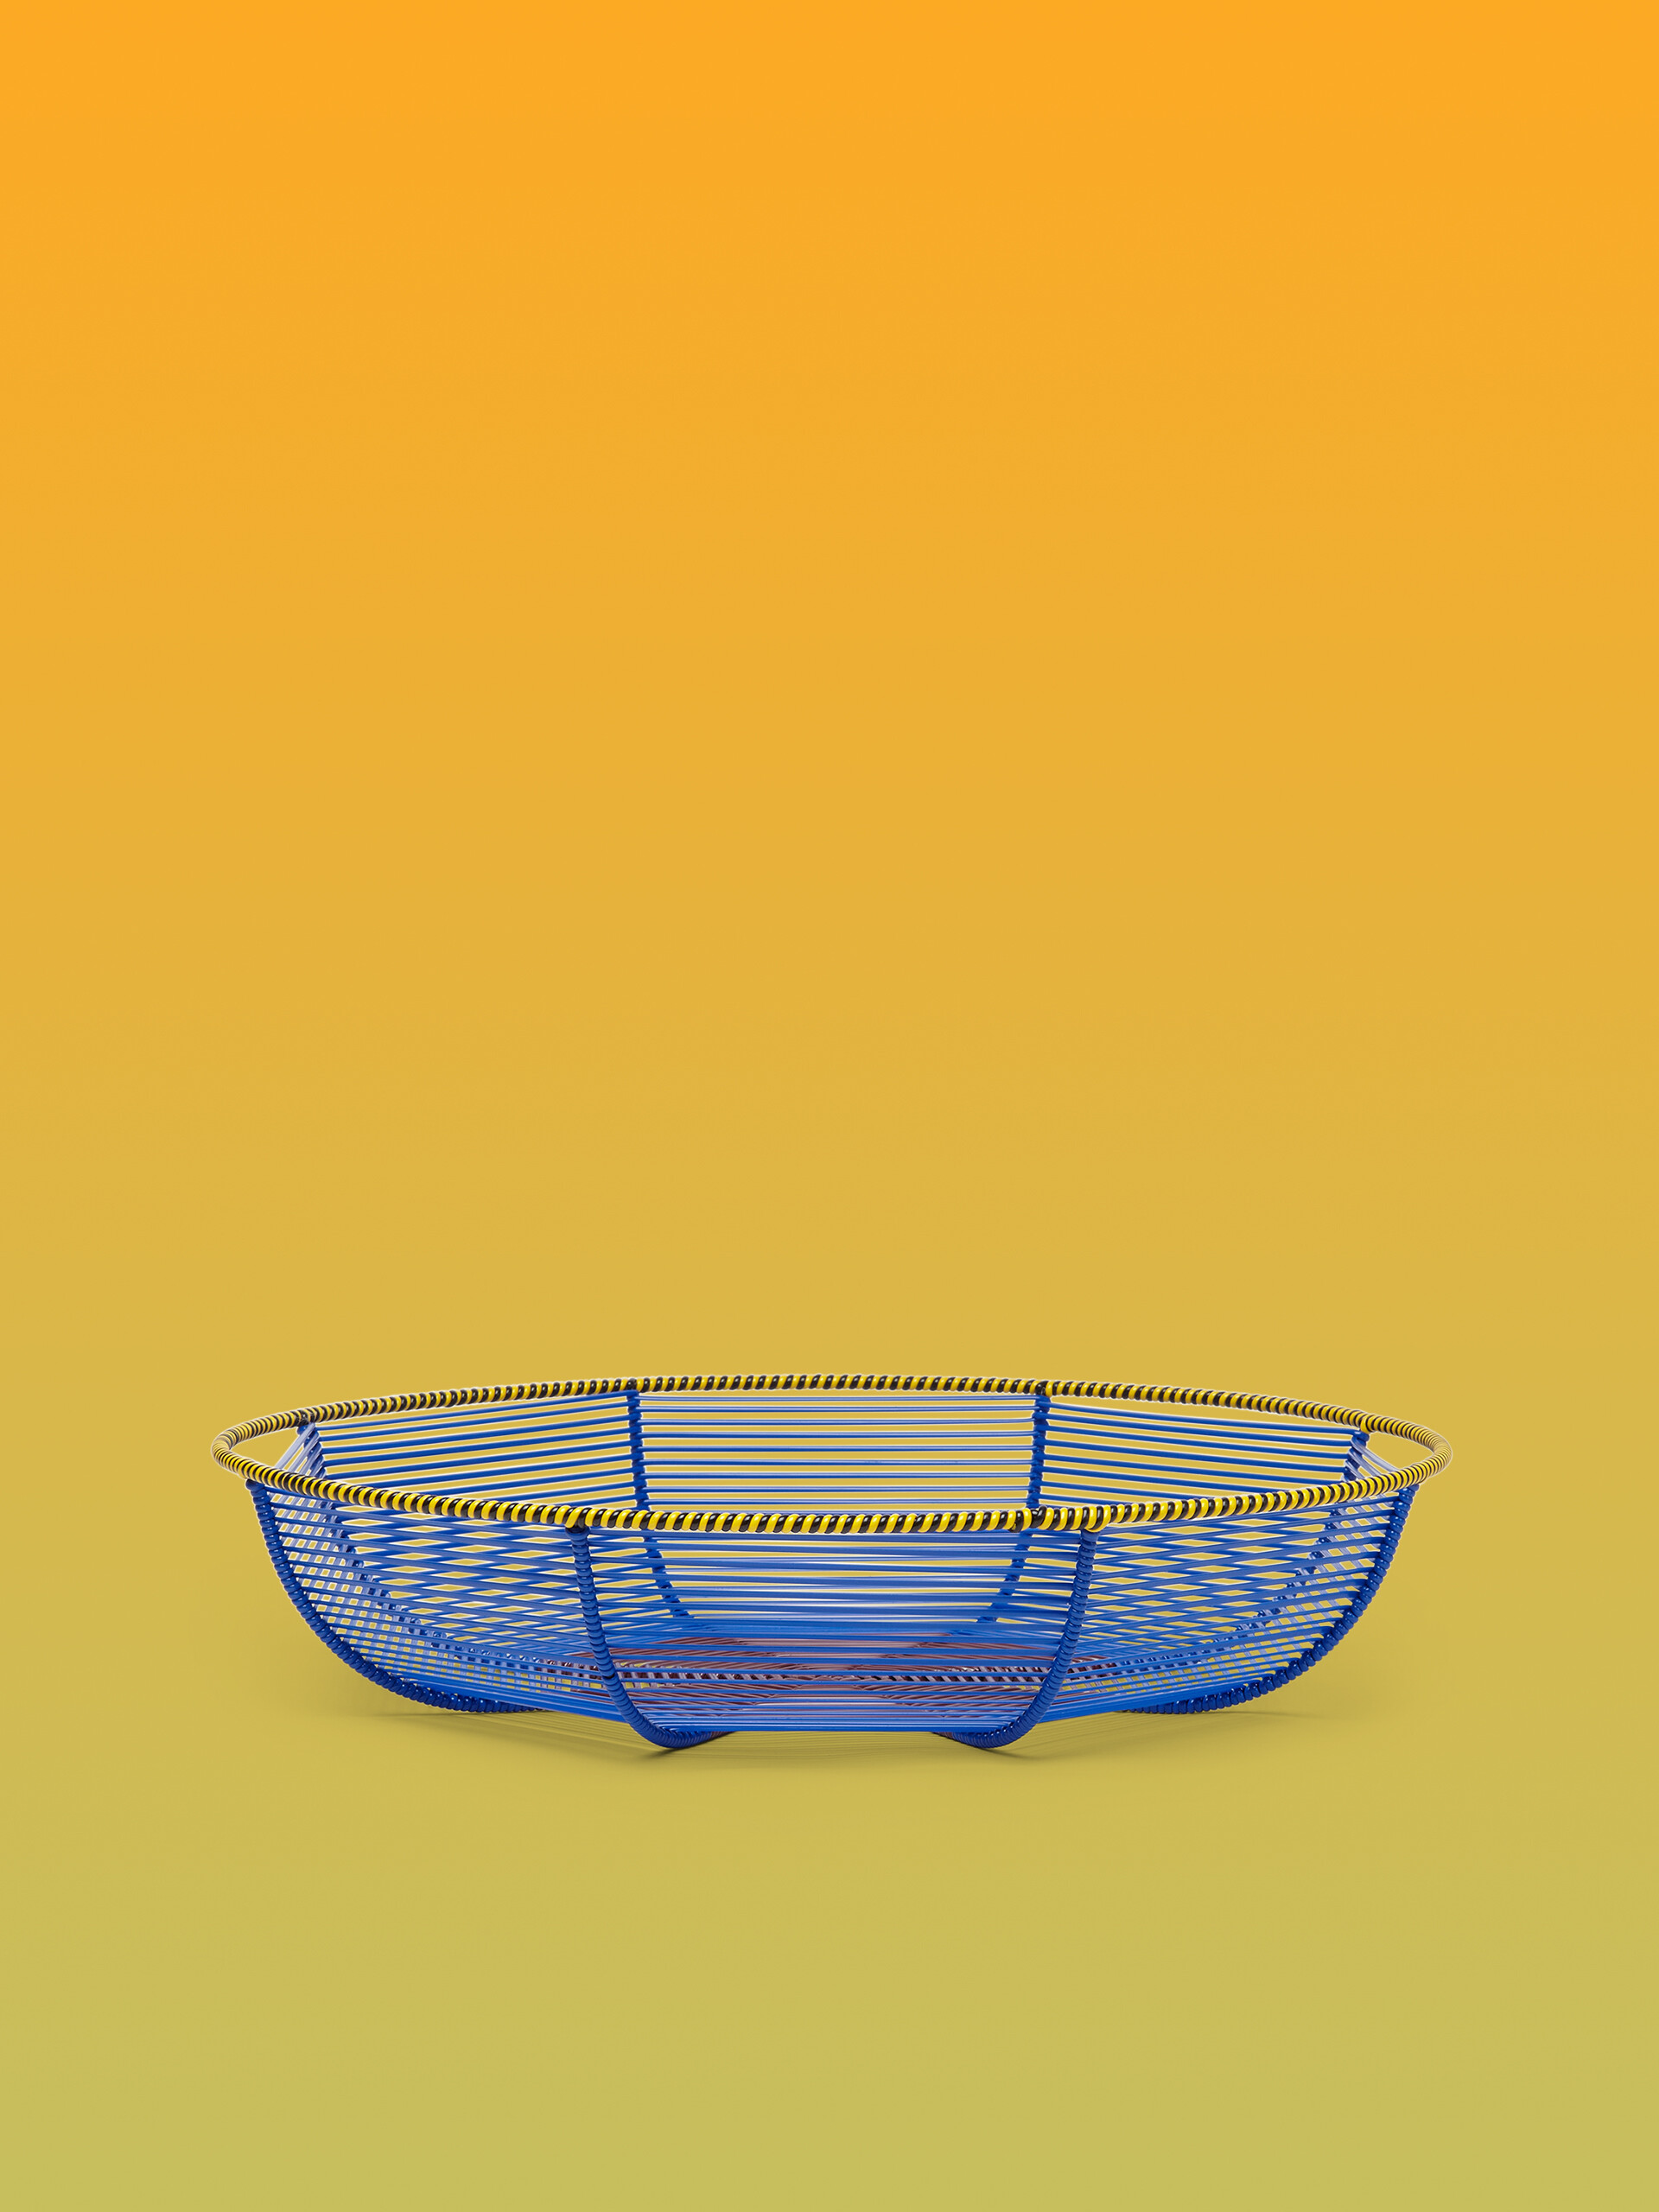 MARNI MARKET iron circular large fruit holder with blue PVC - Home Accessories - Image 1